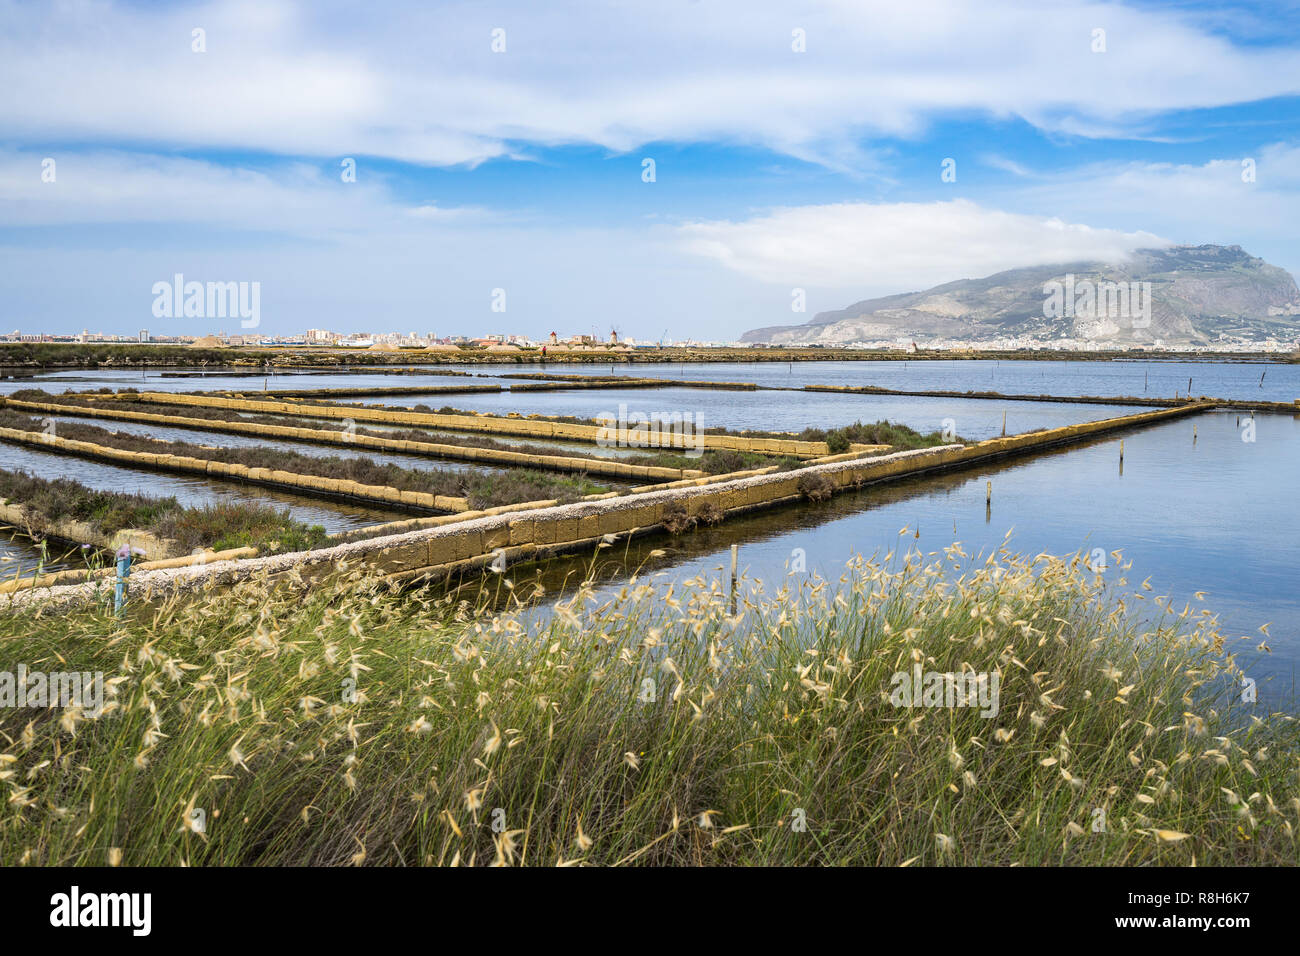 Landscape of Saline di Trapani e Paceco nature reserve with Mount Erice on the background, Sicily, Italy Stock Photo